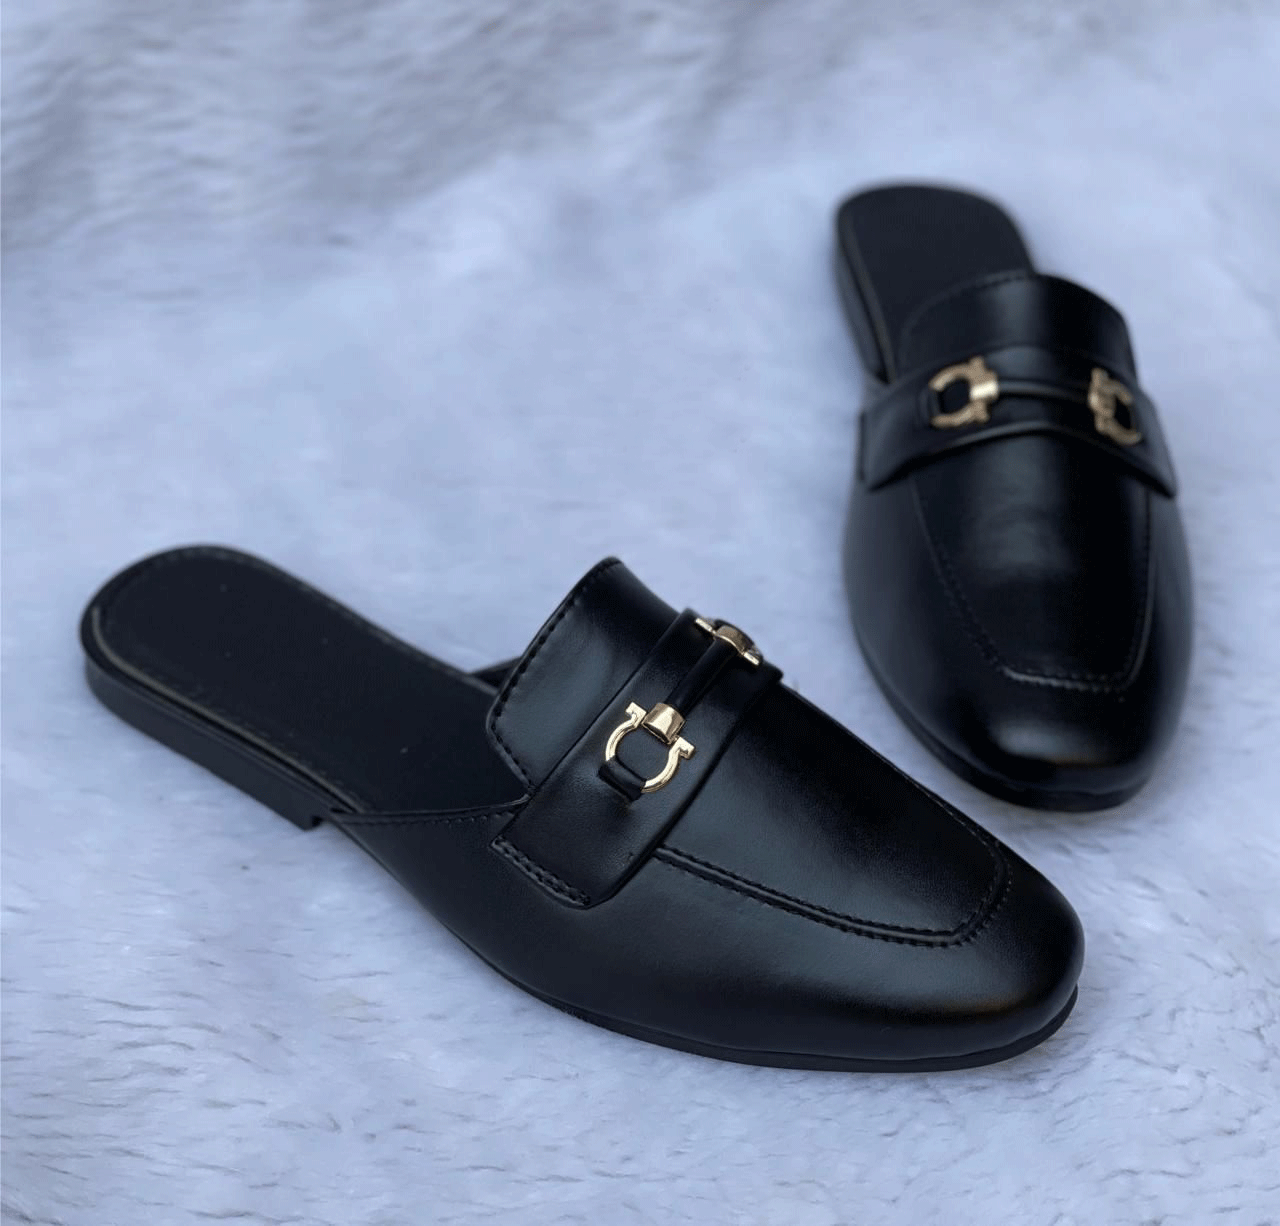 Men's Backless Slip On Mule Gold Buckle Loafers Shoes-JonasParamount